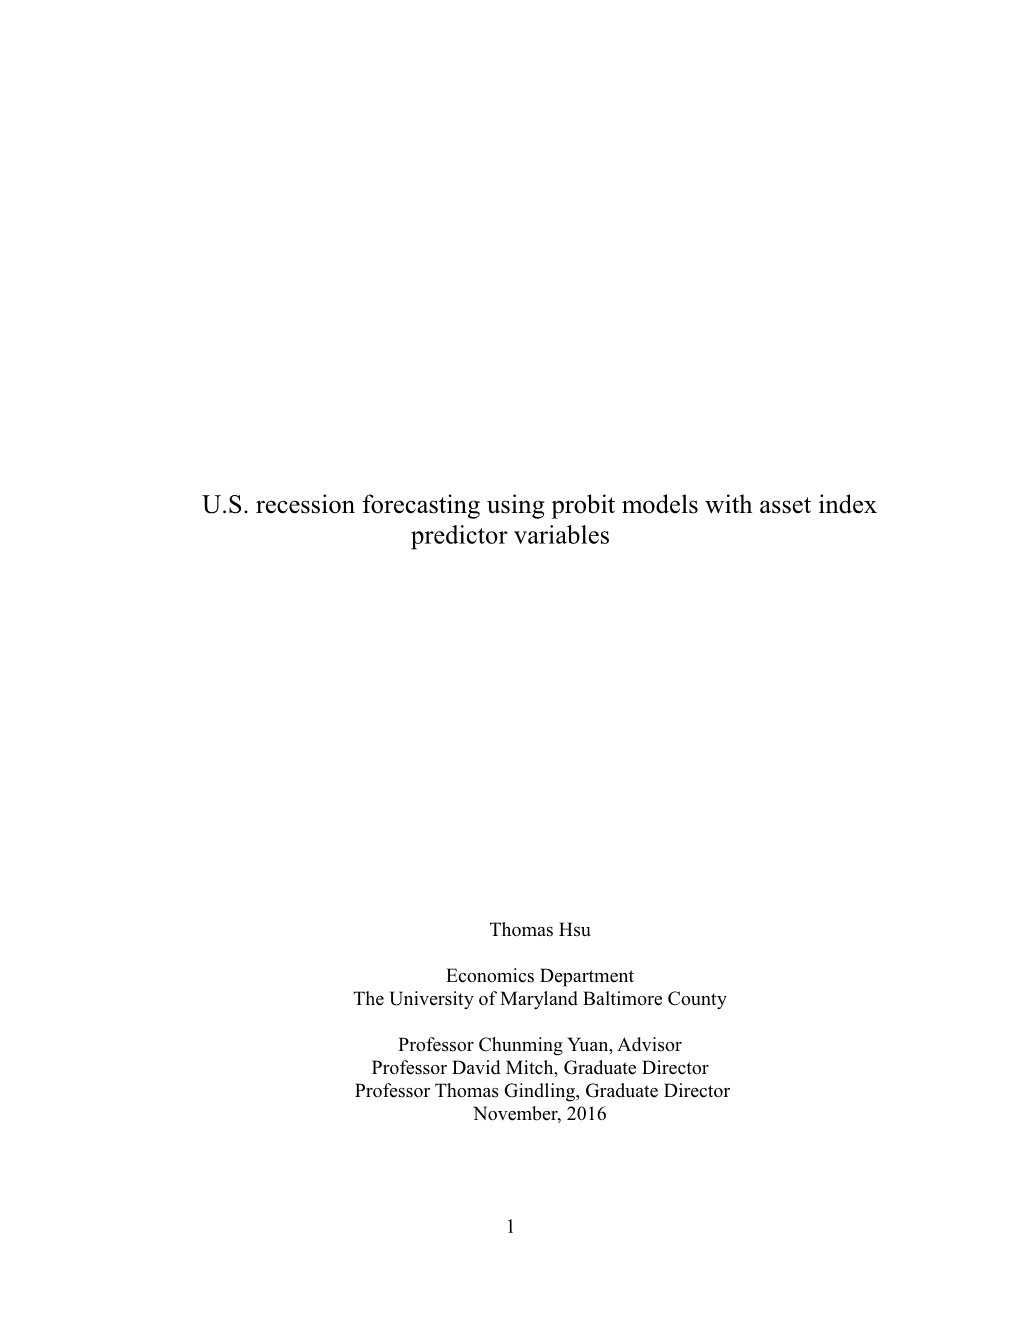 U.S. Recession Forecasting Using Probit Models with Asset Index Predictor Variables